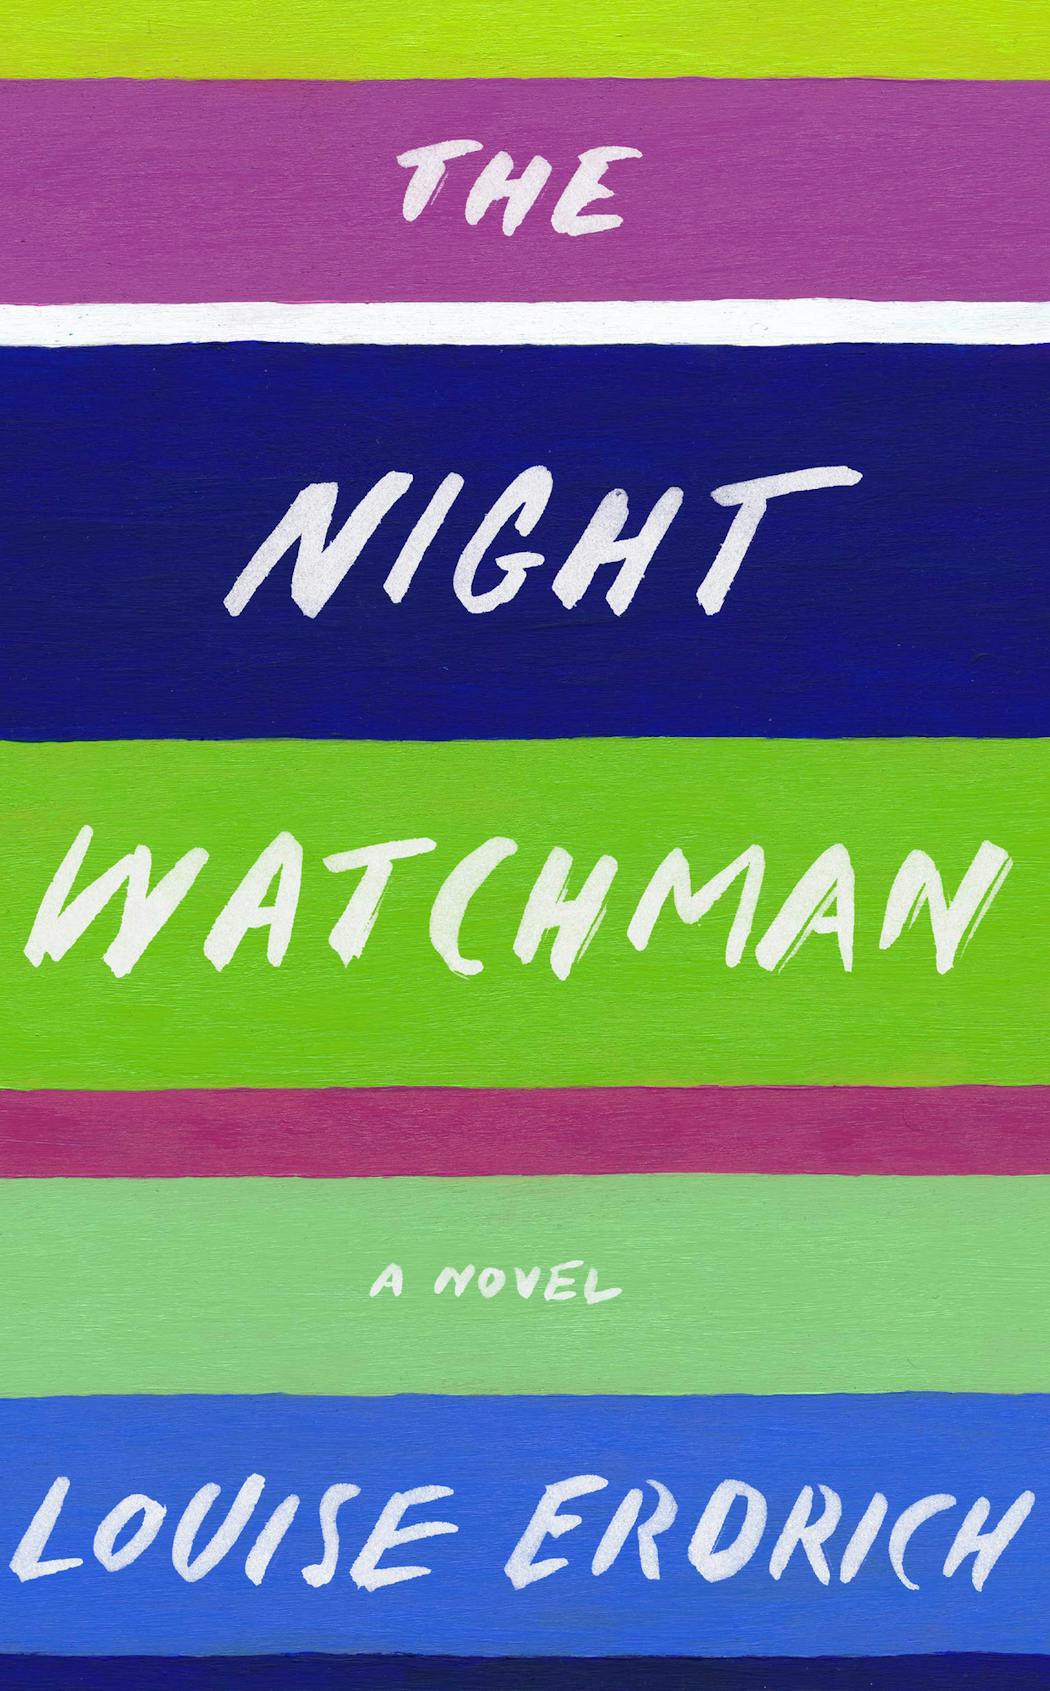 “The Night Watchman” by Louise Erdrich